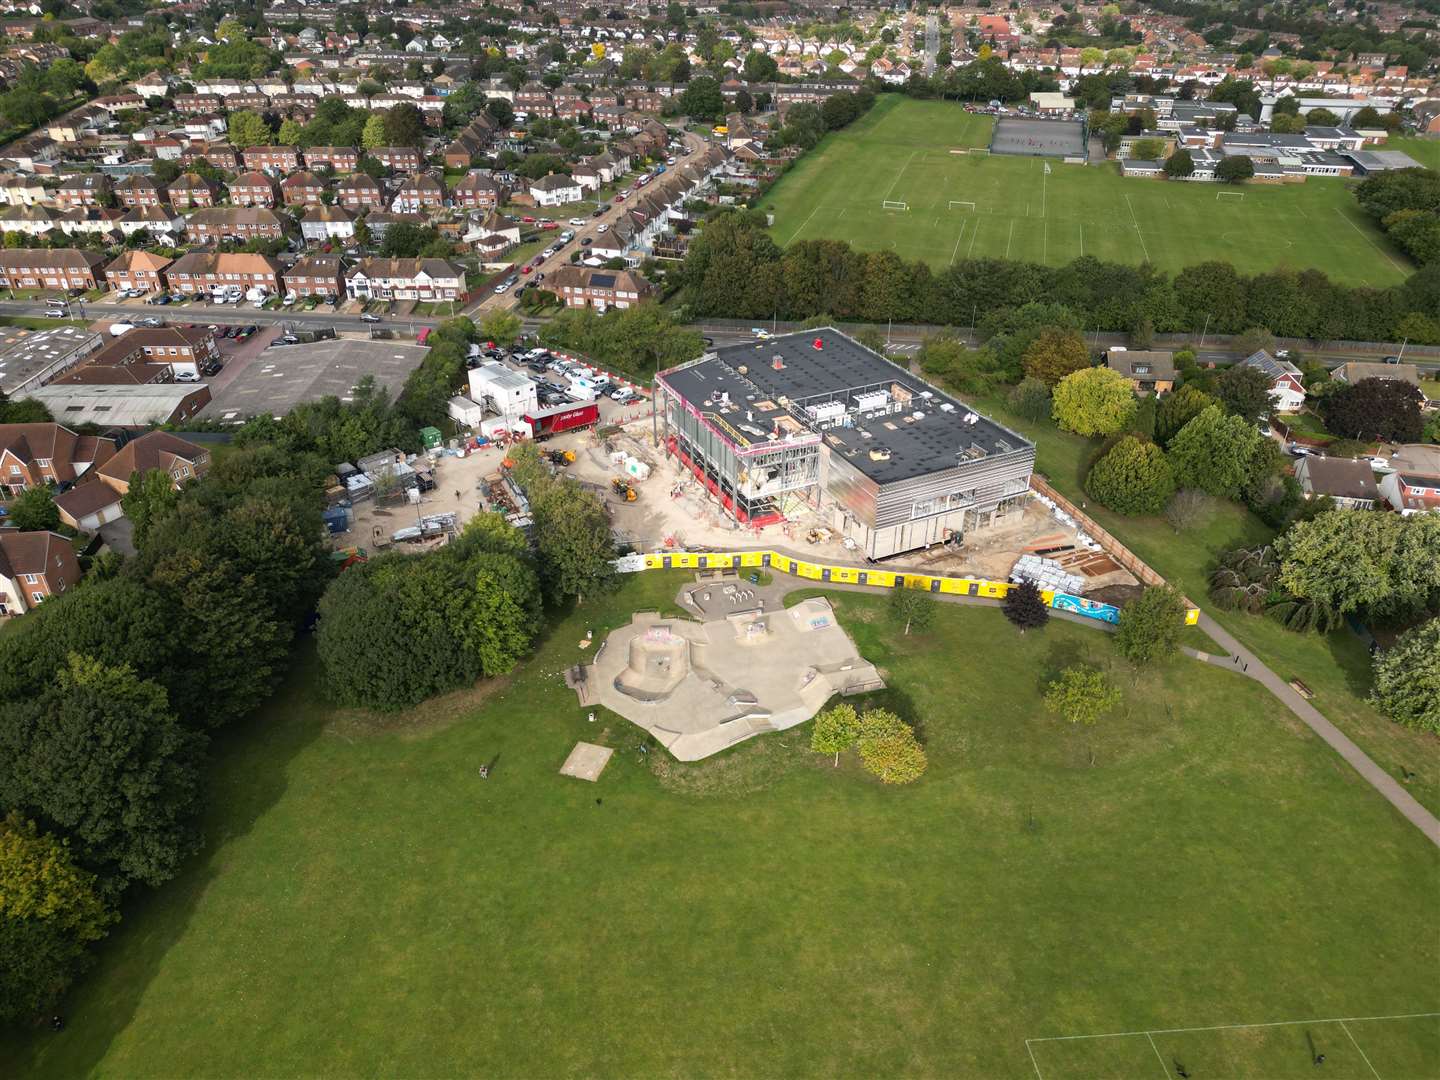 The progress being made at Splashes leisure centre in Rainham can clearly be seen from above. Picture: Phil Drew